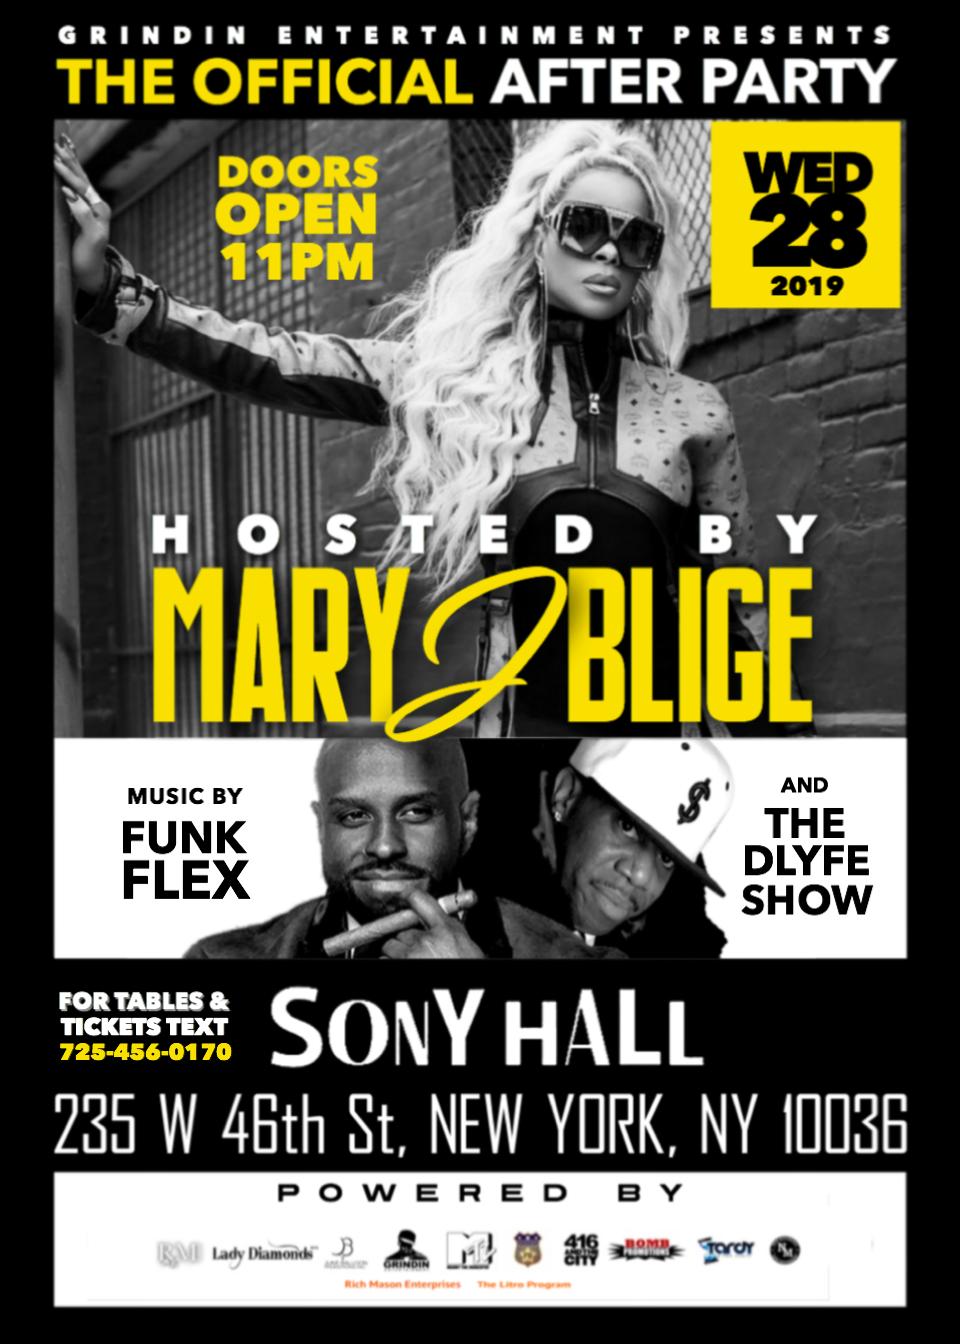 Mary J Blige The Official After Party @ Sony Hall Wednesday August 28, 2019